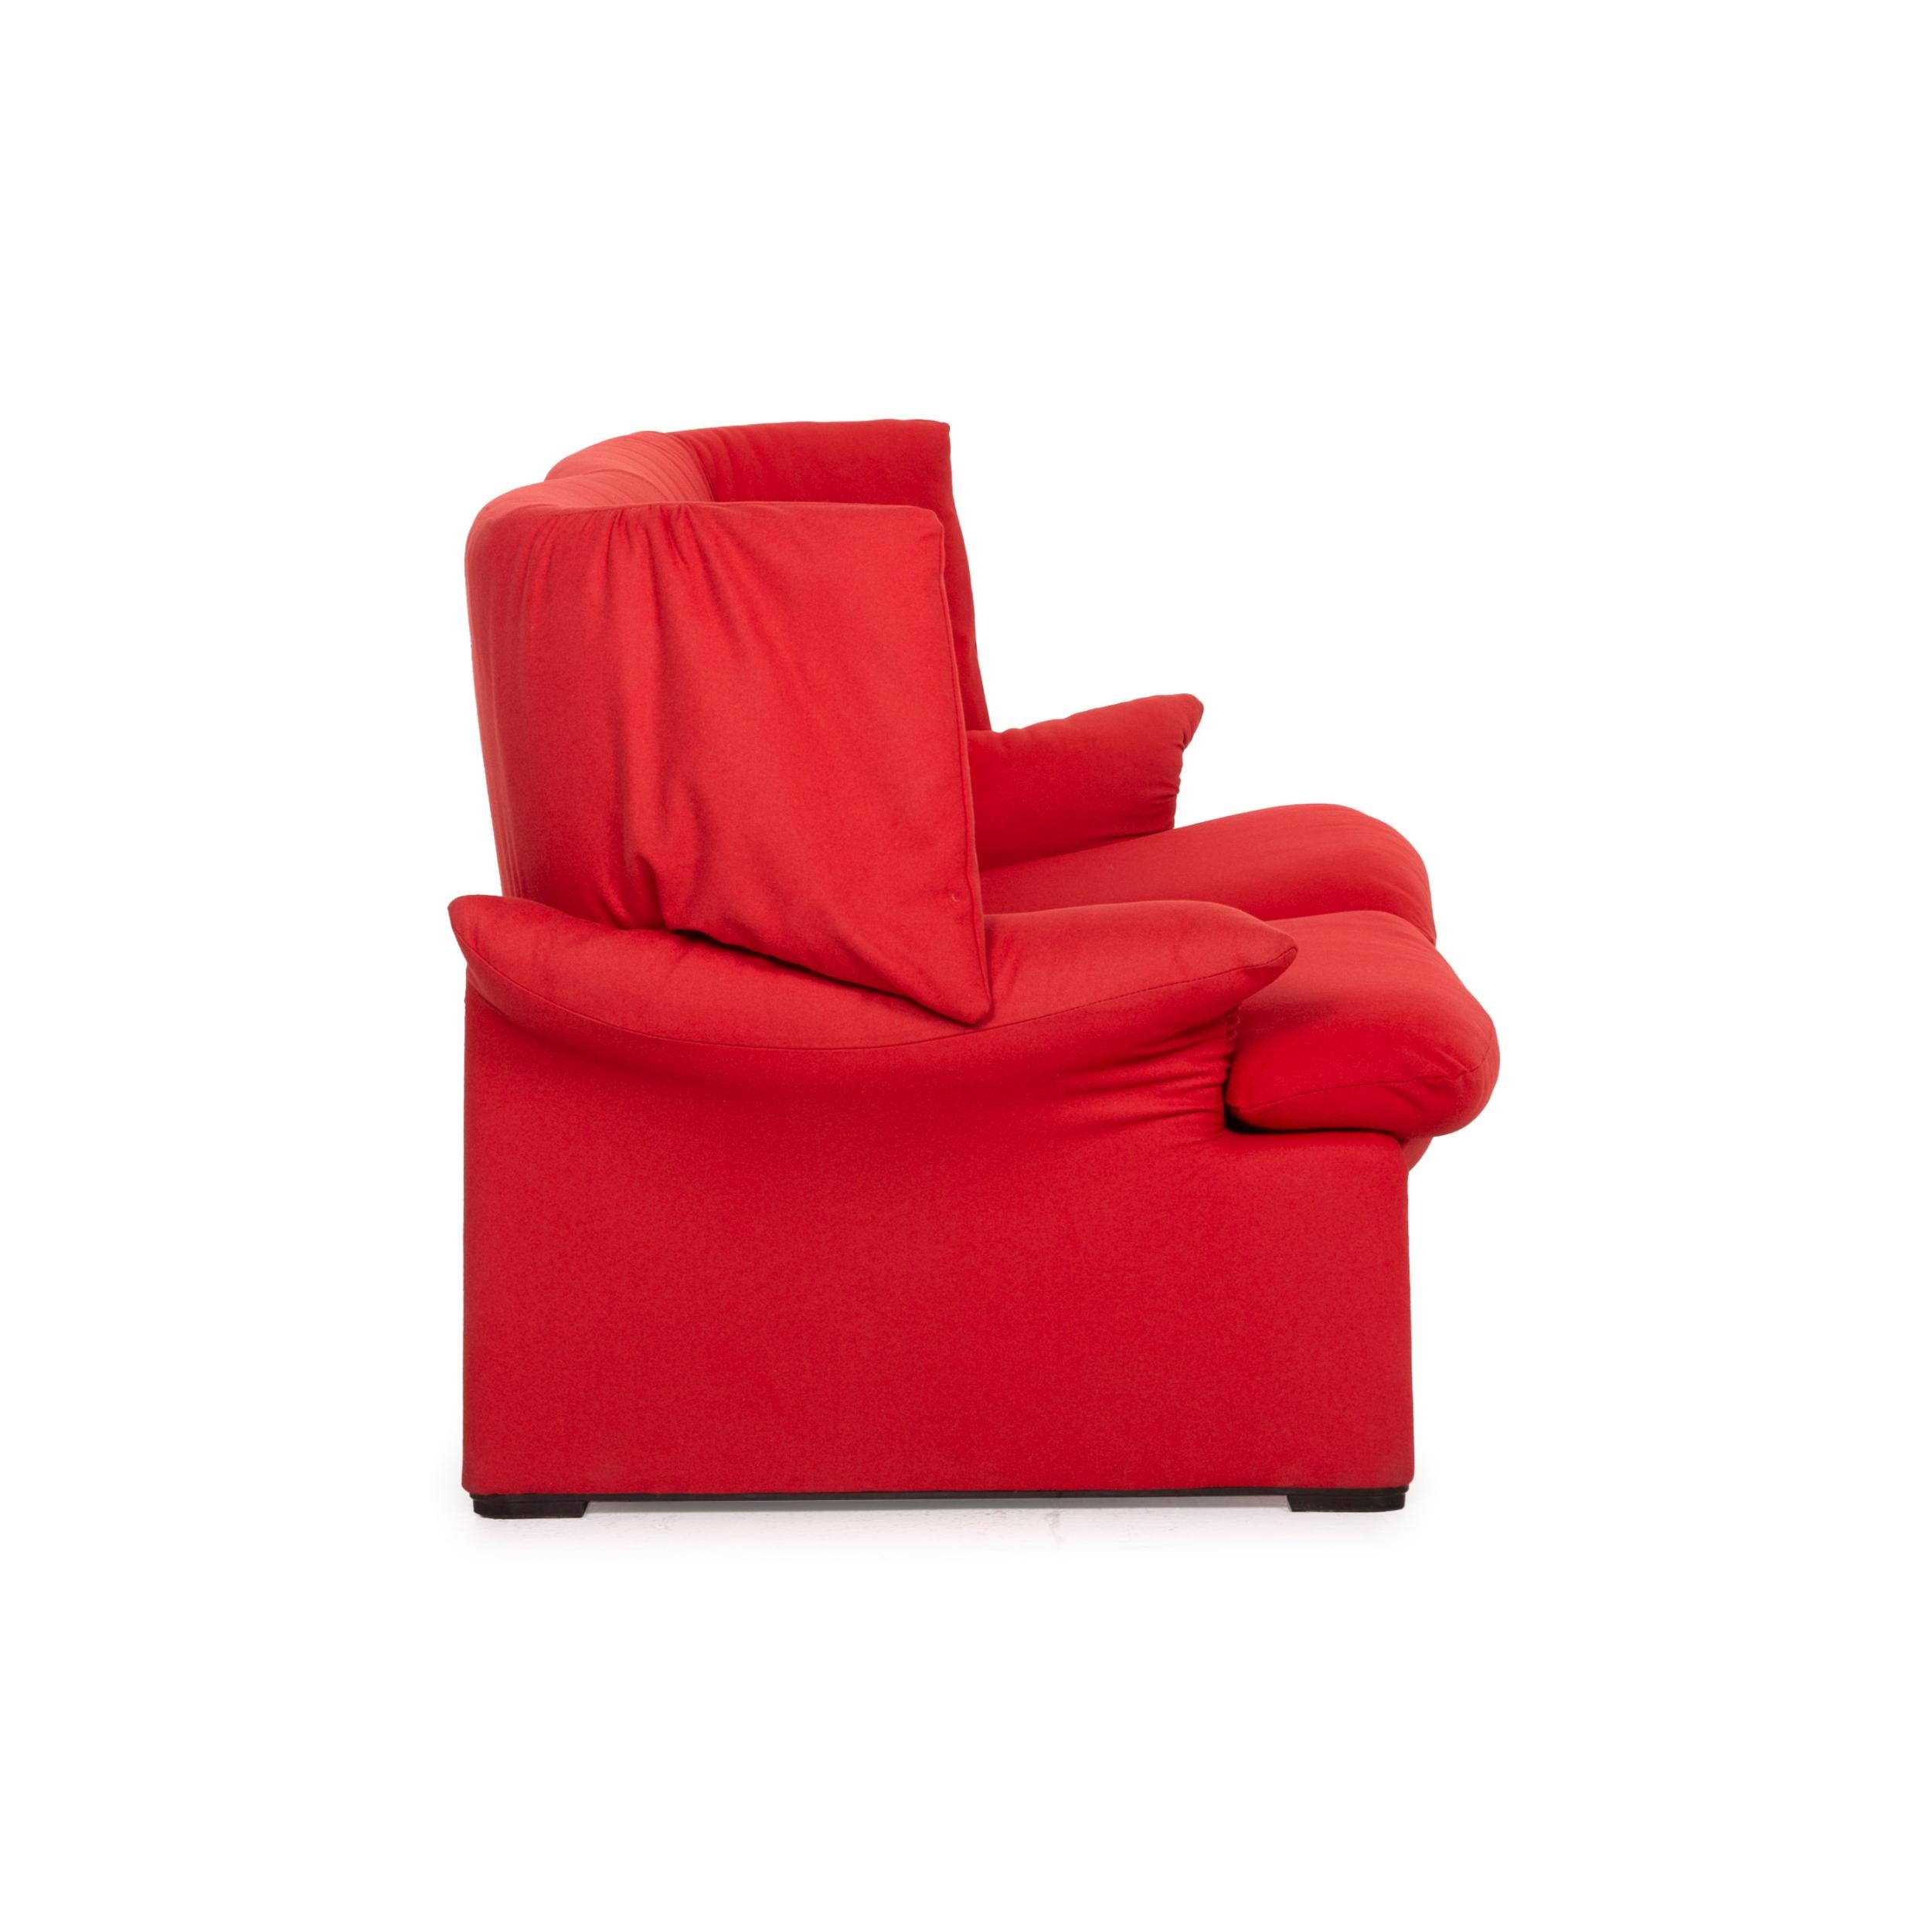 Cassina Maralunga Fabric Sofa Red Two-Seater For Sale 1